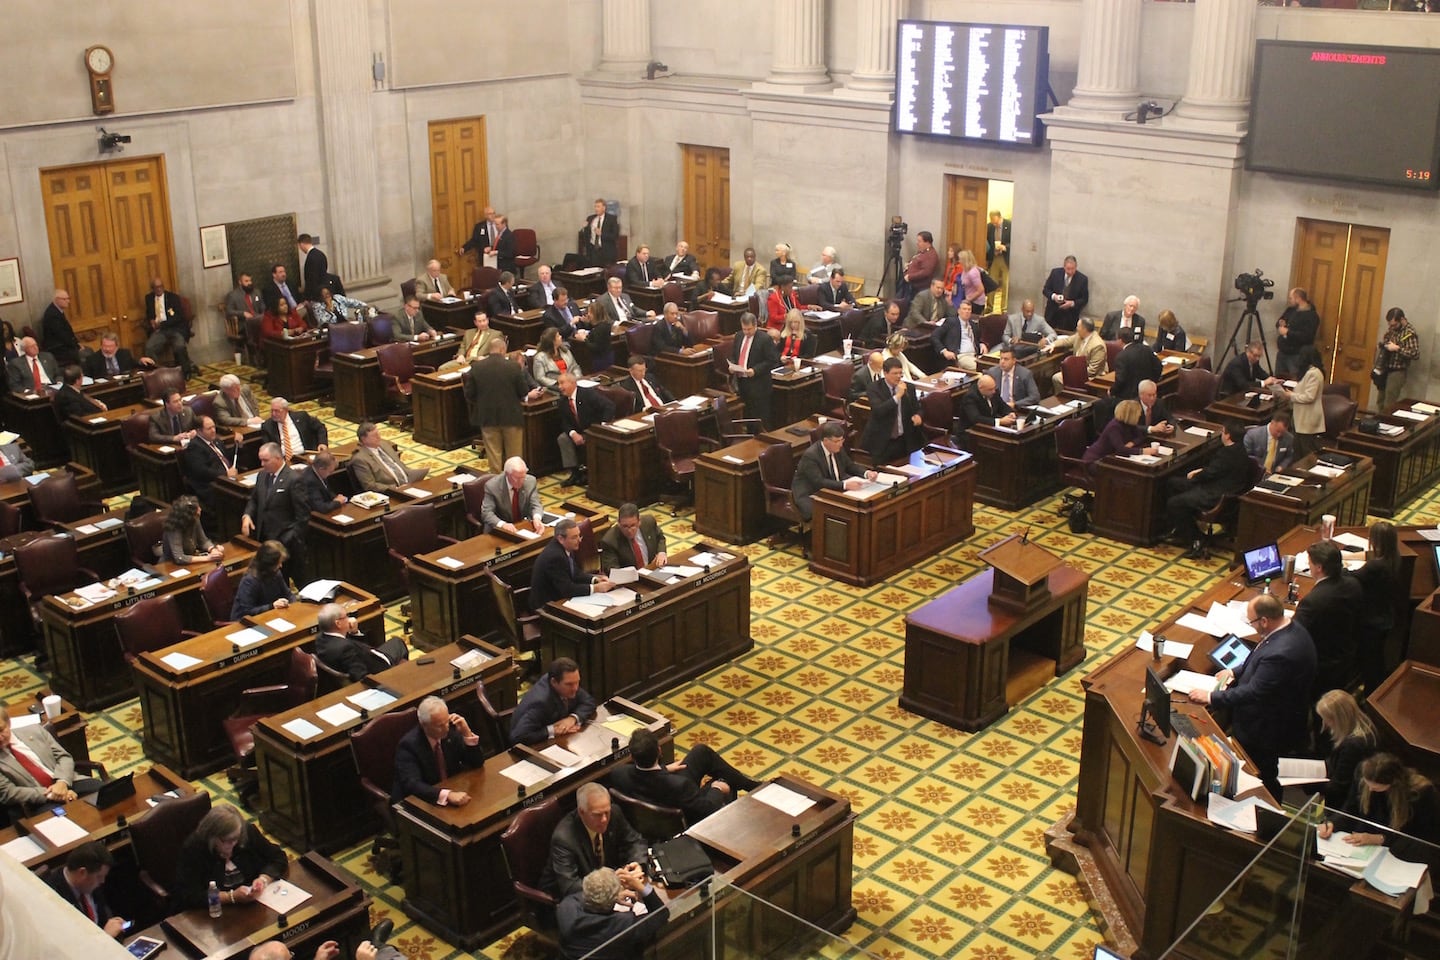 The Tennessee House of Representatives is in the State Capitol in Nashville.